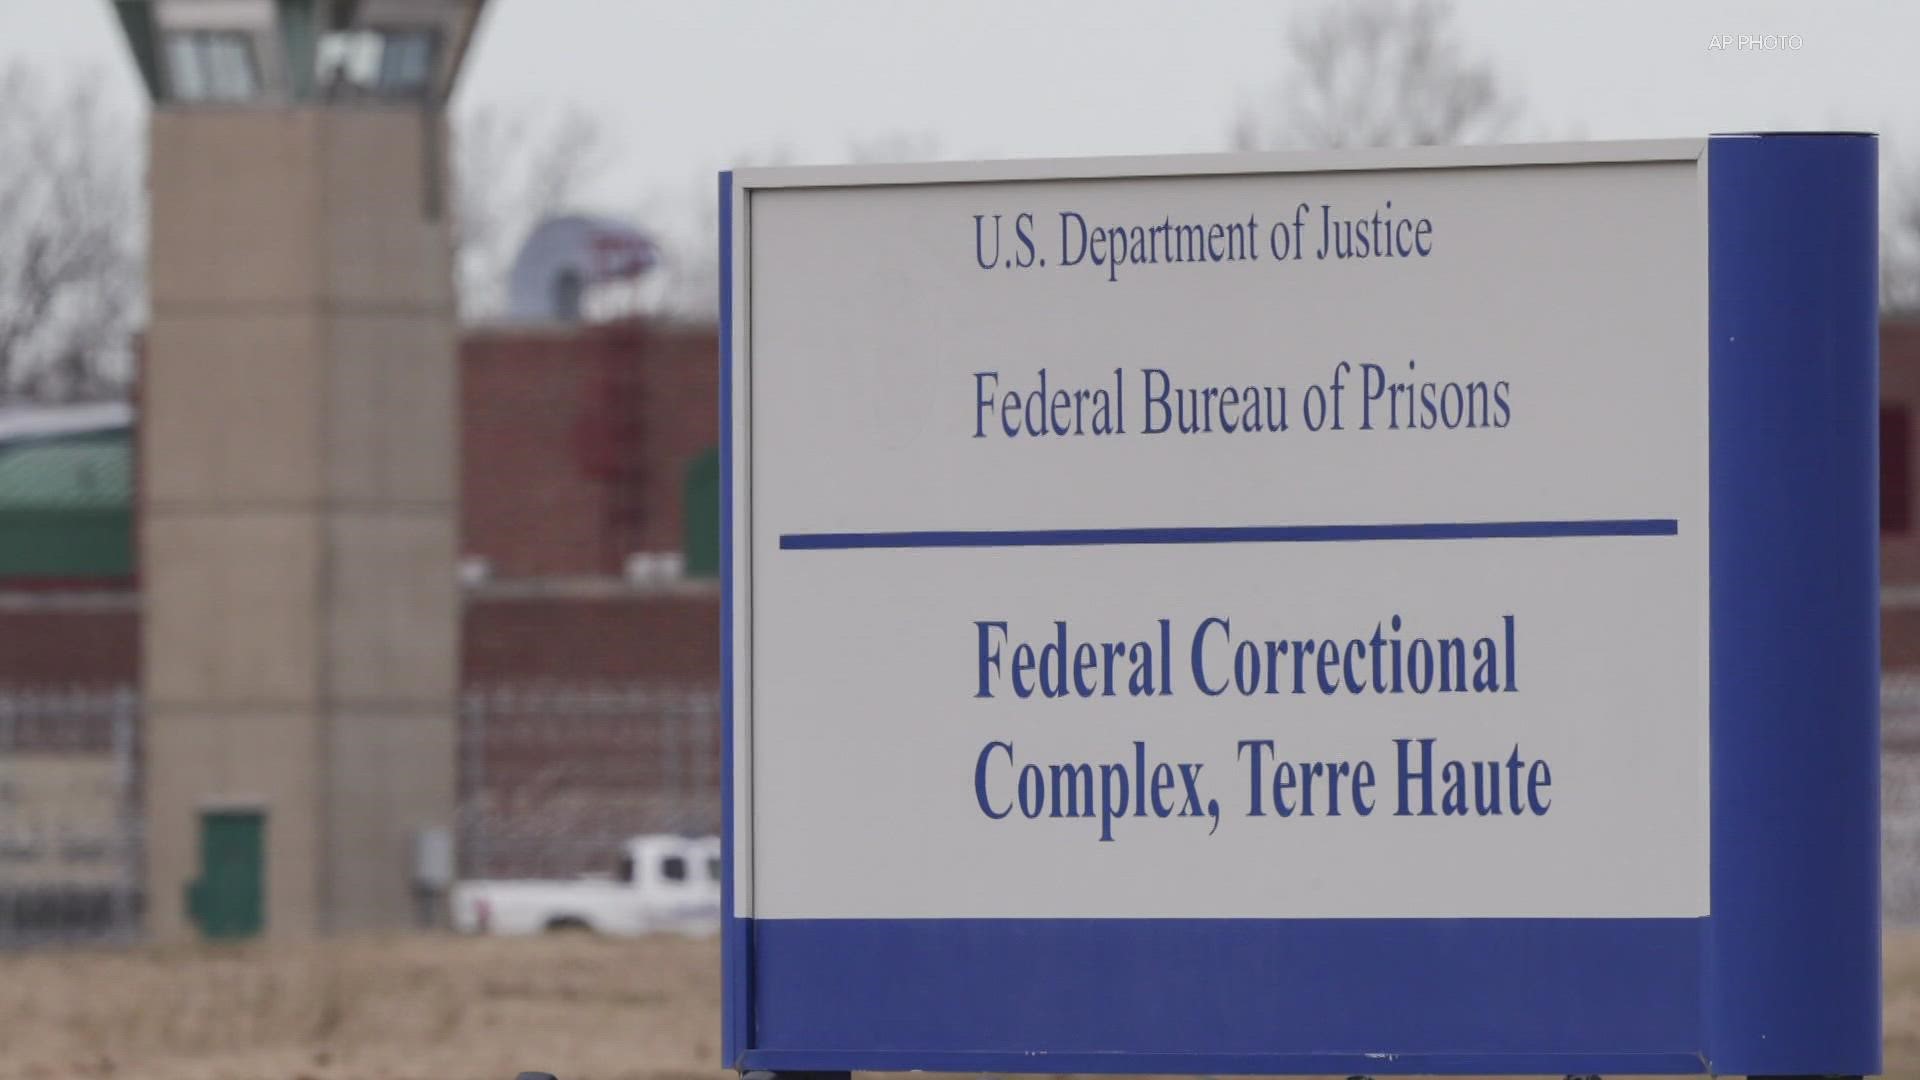 USP Terre Haute is a high-security facility and currently houses 1,244 male offenders.